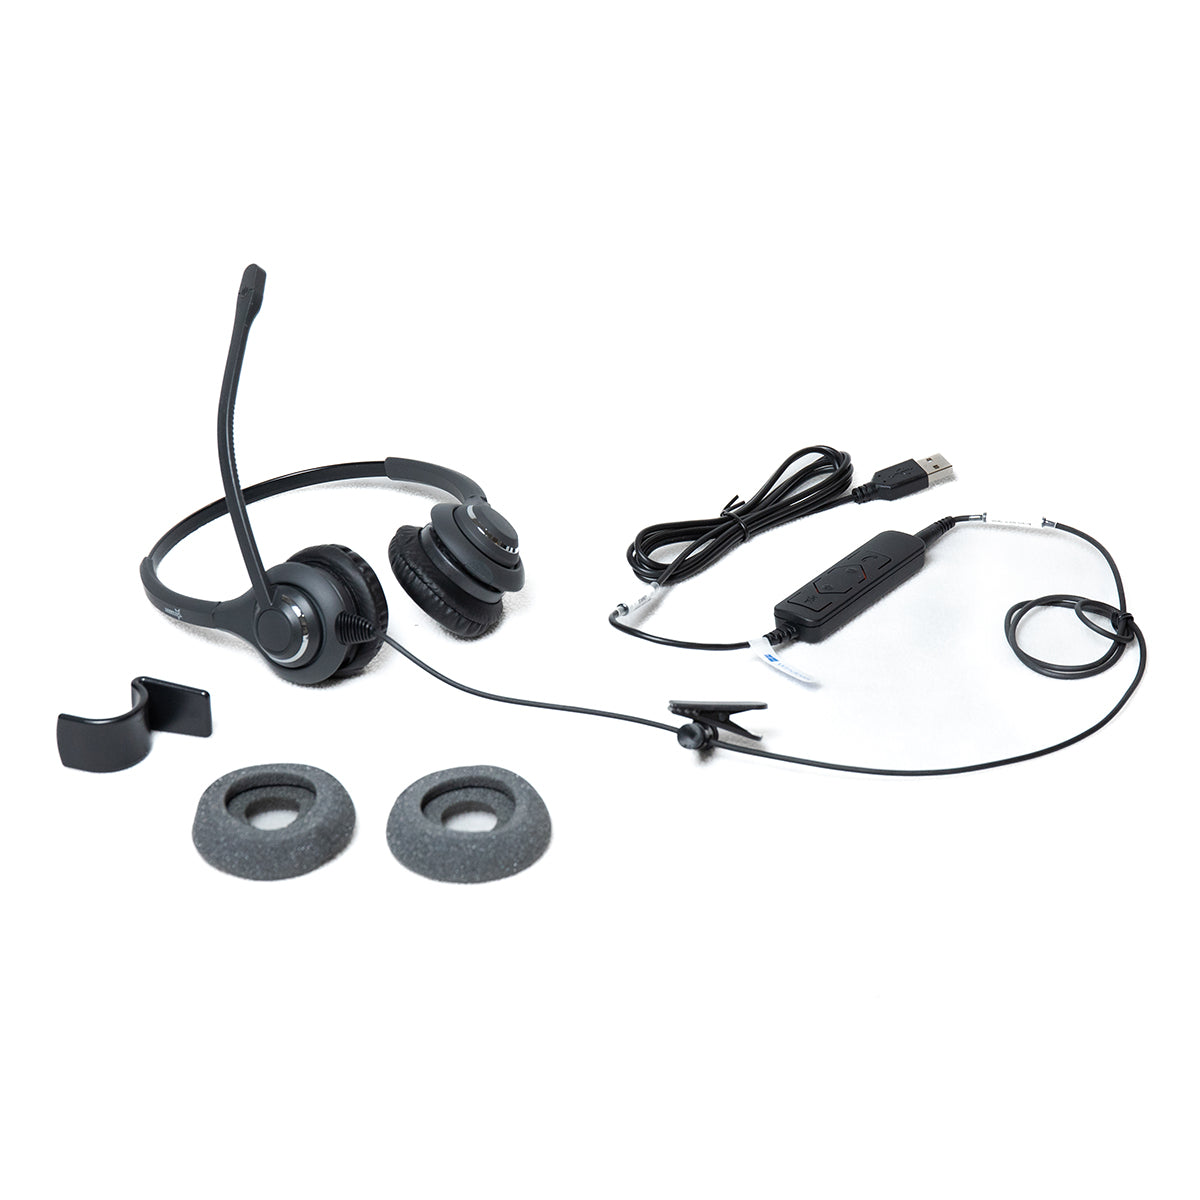 Starkey S5600 ELITE USB & 3.5MM Headset with In Line Control Passive Noise Canceling Mic